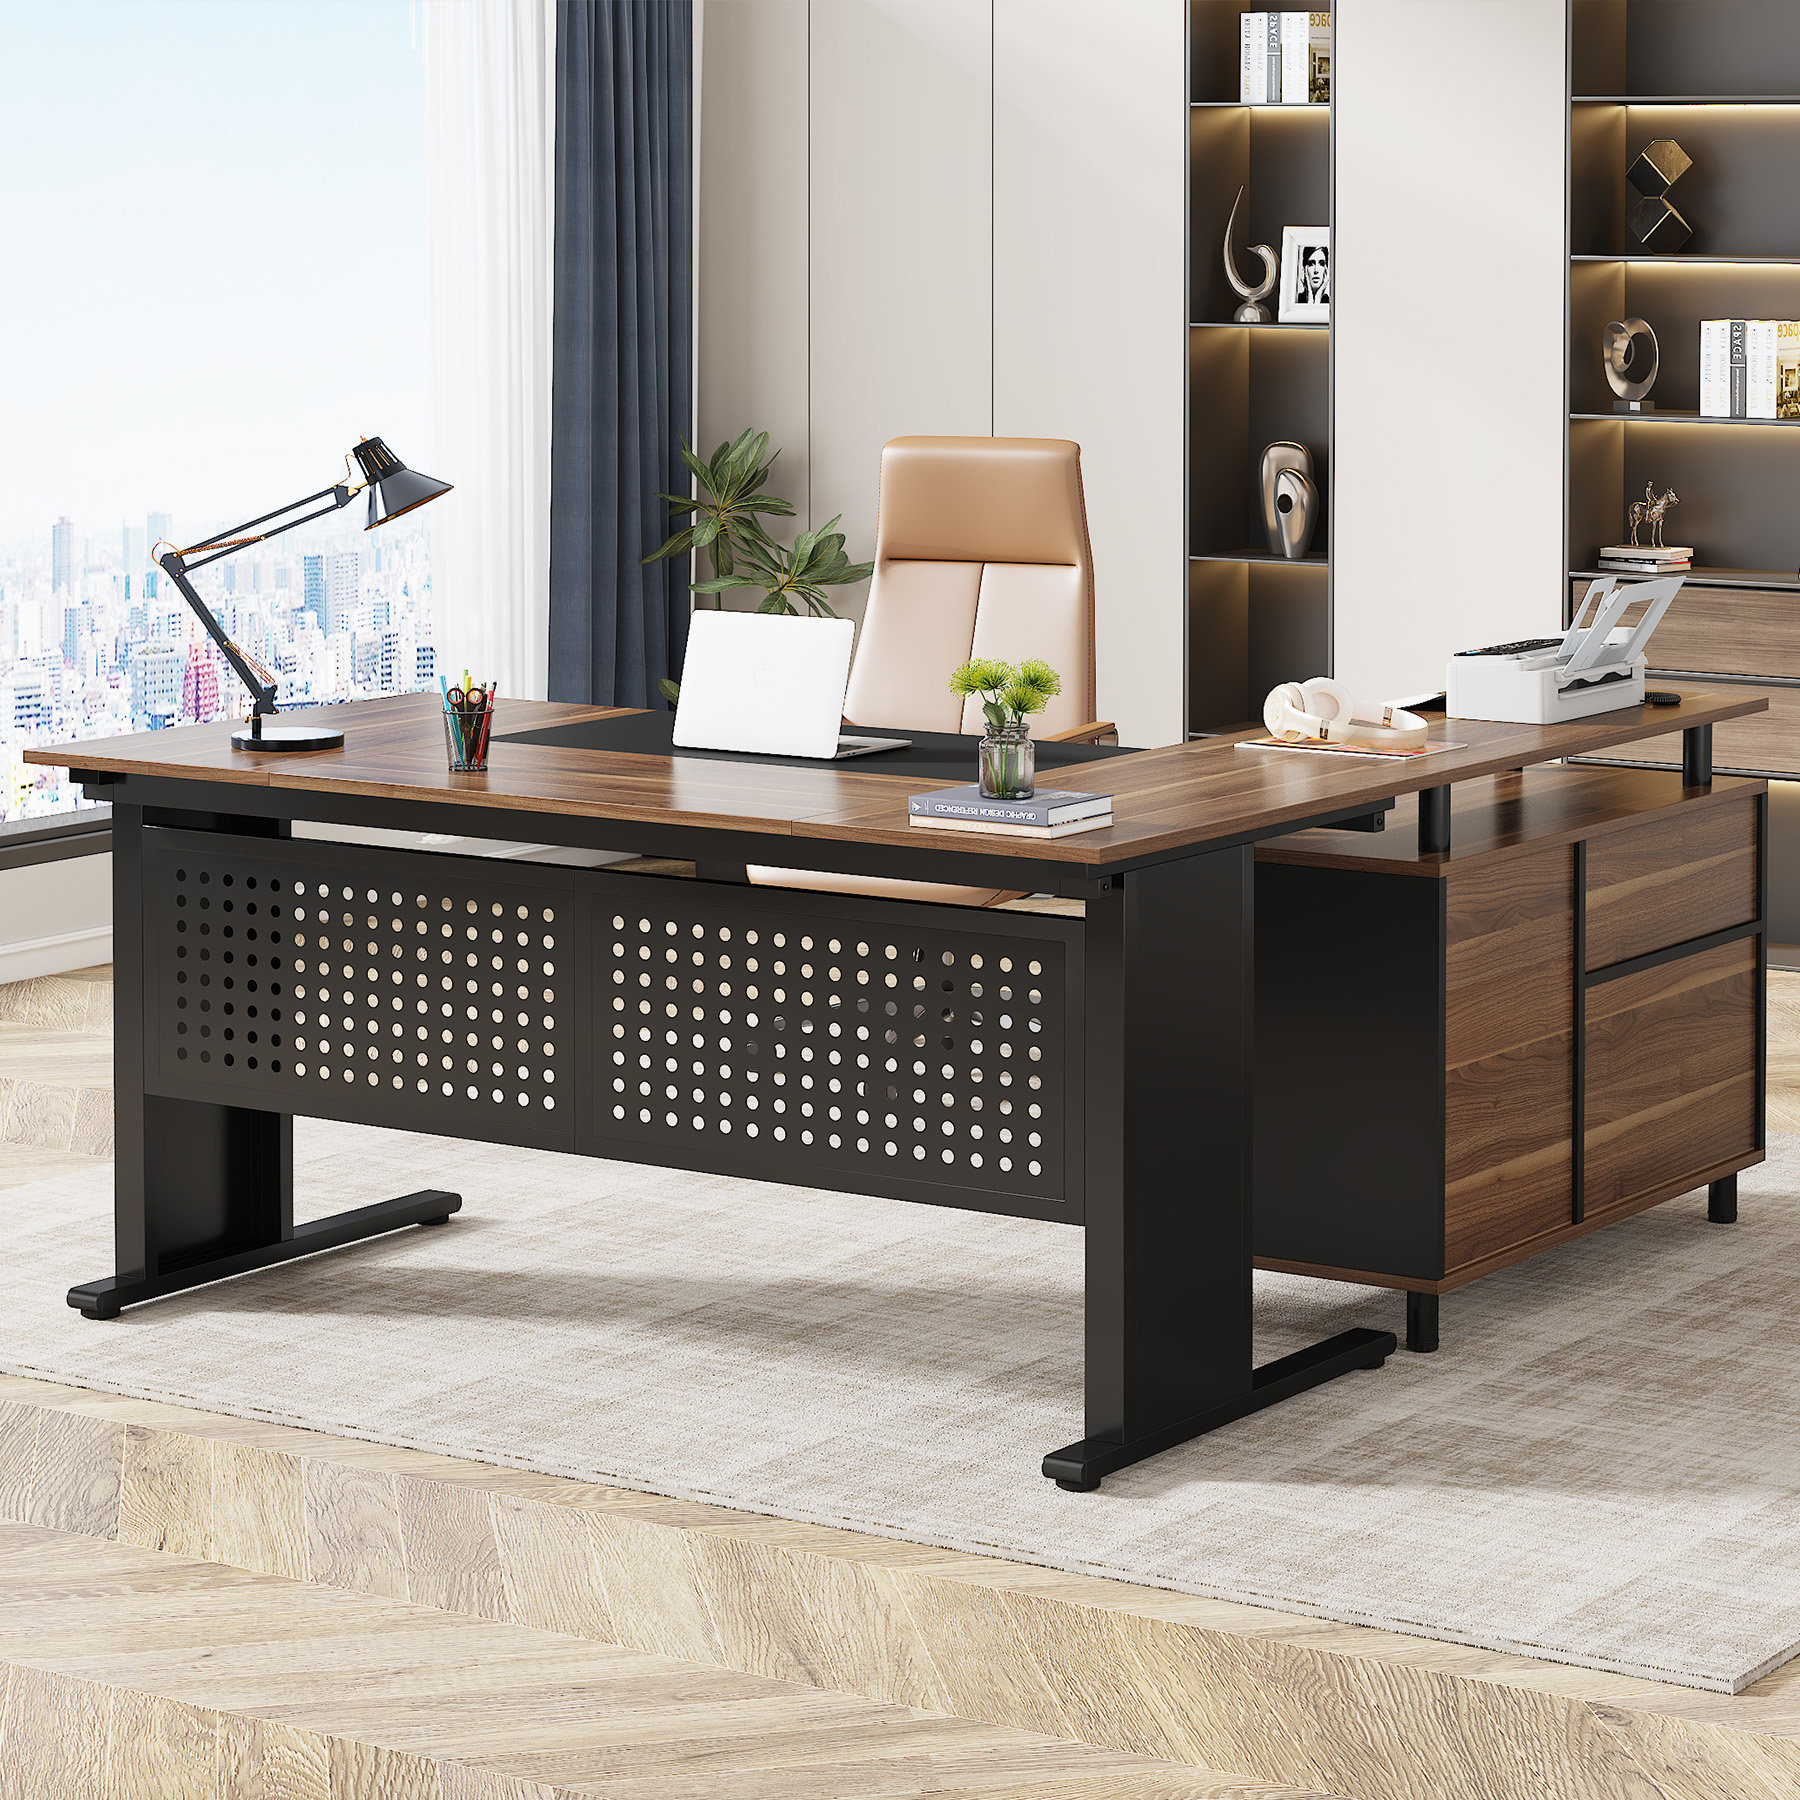 Executive Wooden Classic Office Furniture Large L Shape Luxury